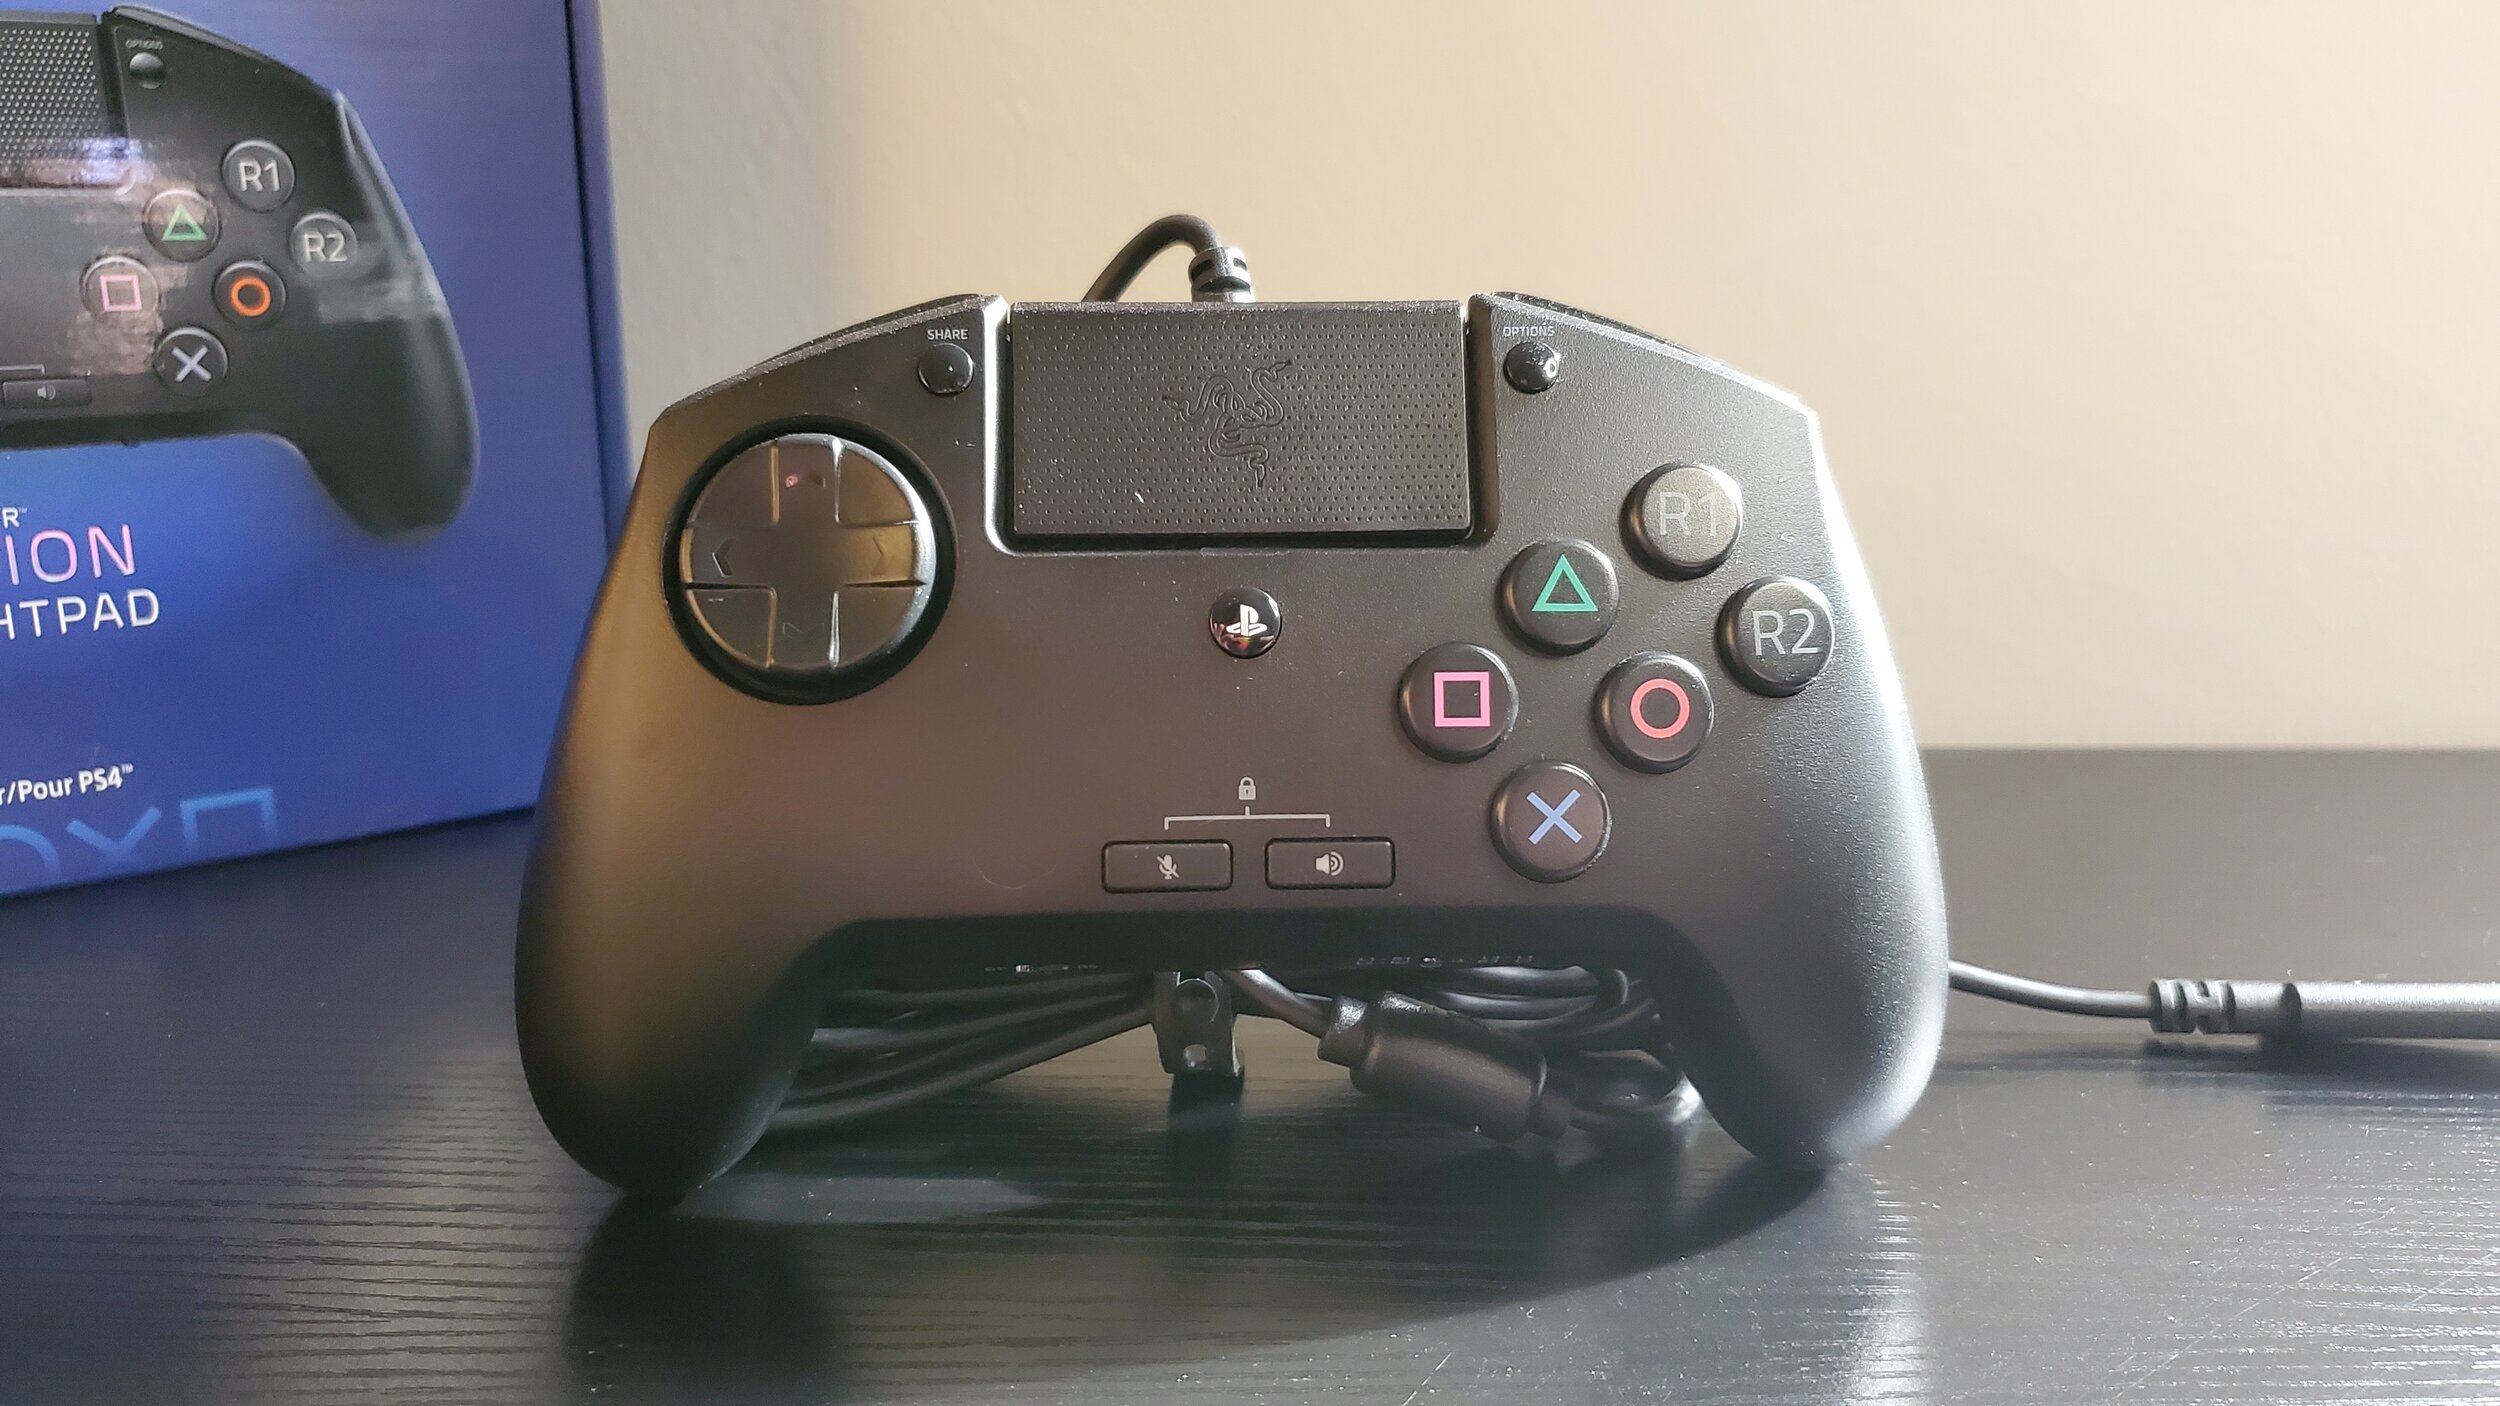 Review] Razer Raion Fightpad for PlayStation 4 (PS4), PlayStation 